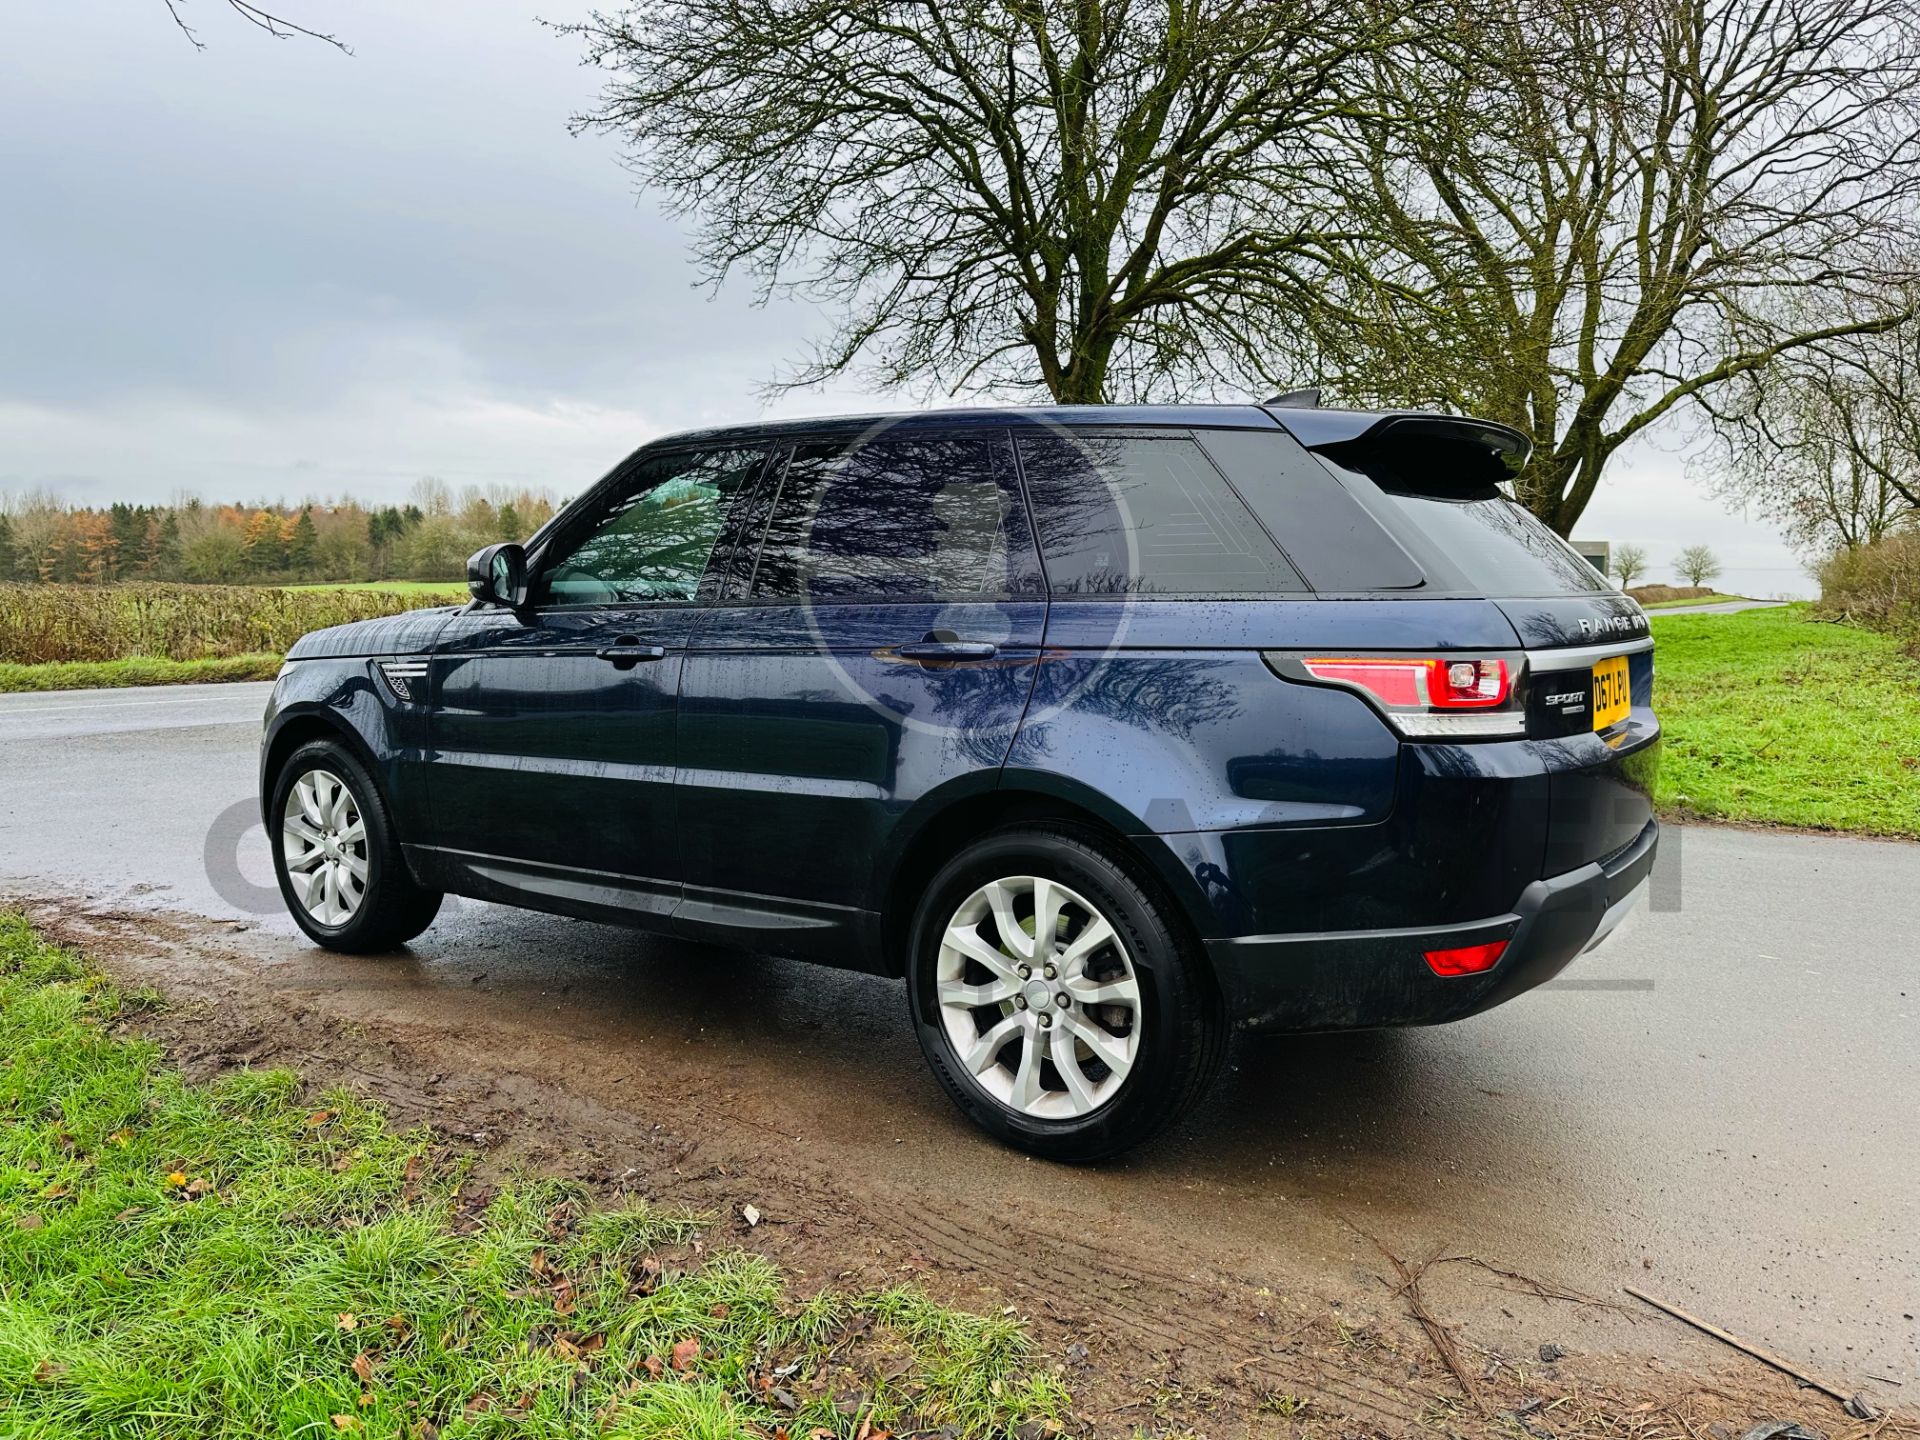 (ON SALE) RANGE ROVER SPORT *HSE EDITION* *AUTOMATIC / COMMANDSHIFT* - 2018 MODEL - NO VAT!!! - Image 9 of 41